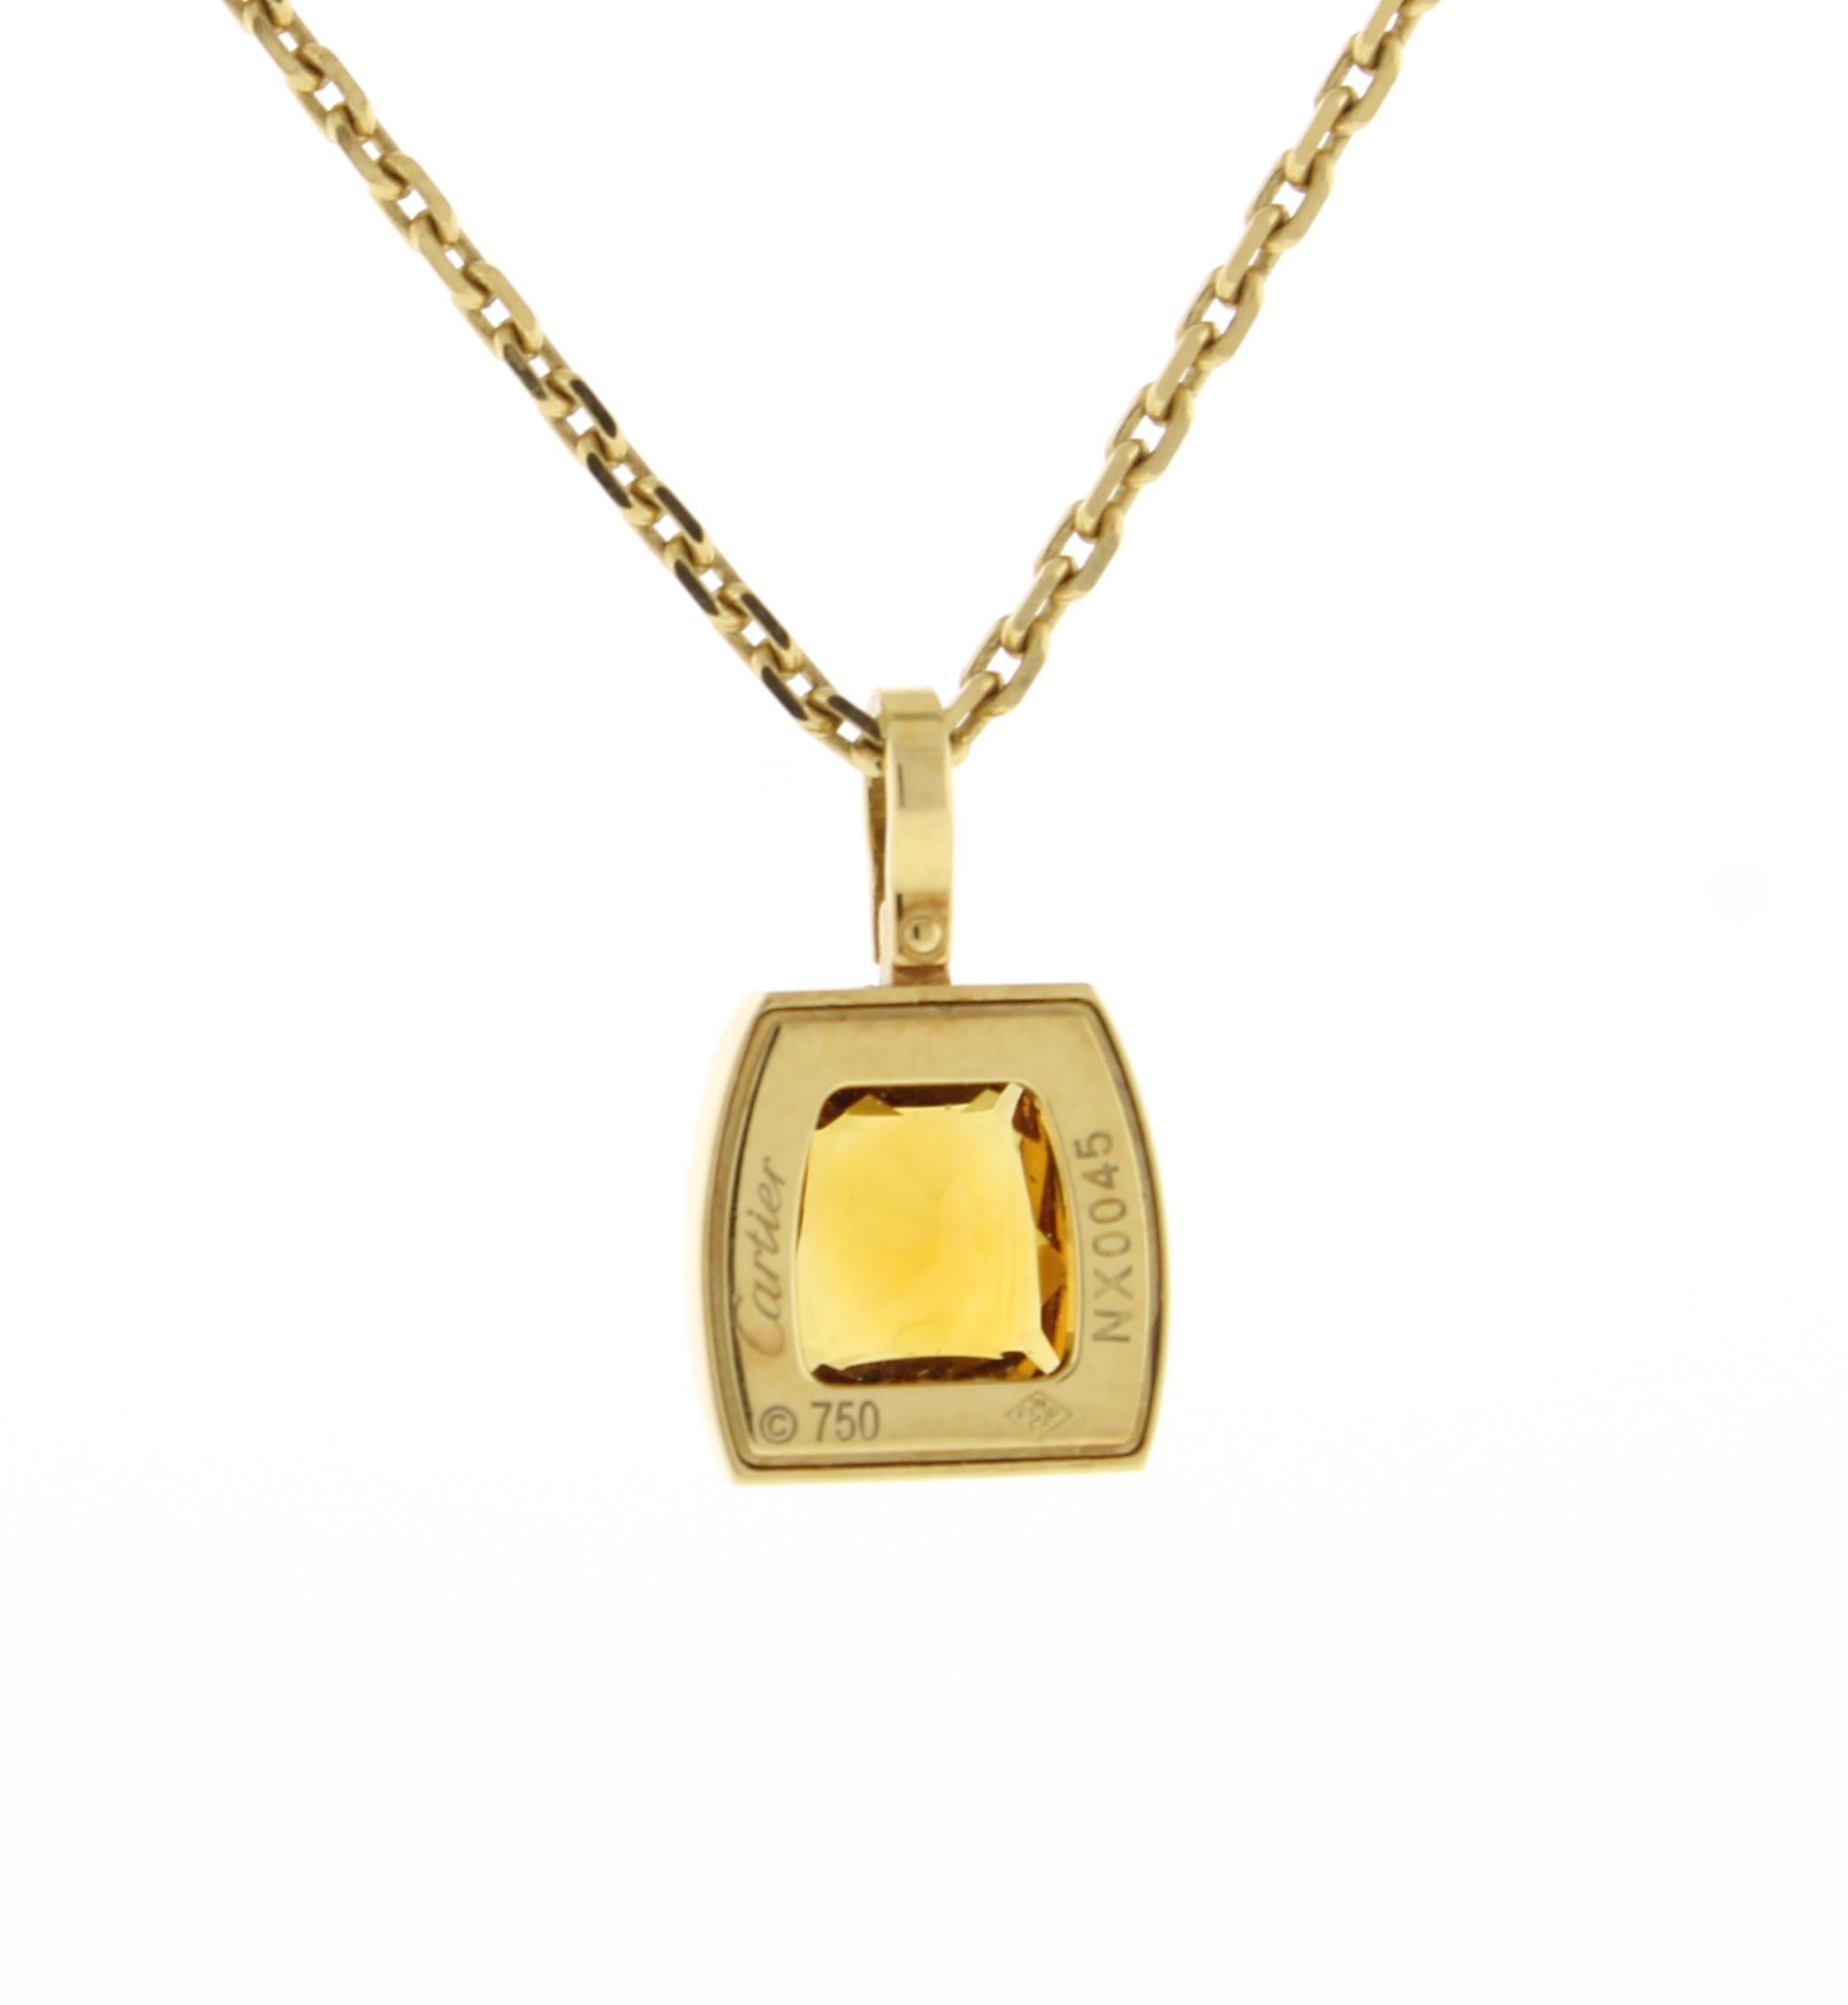 From  Cartier's  La Dona collection, thier La Dona Citrine Pendant.
♦ Designer: Cartier 
♦ Metal: 18 karat
♦ Citrine pendant 10.8mm wide 
♦ 16 inch chain
♦ Circa early 2000s
♦ Packaging: Cartier presentation box with certificate
♦ Condition: